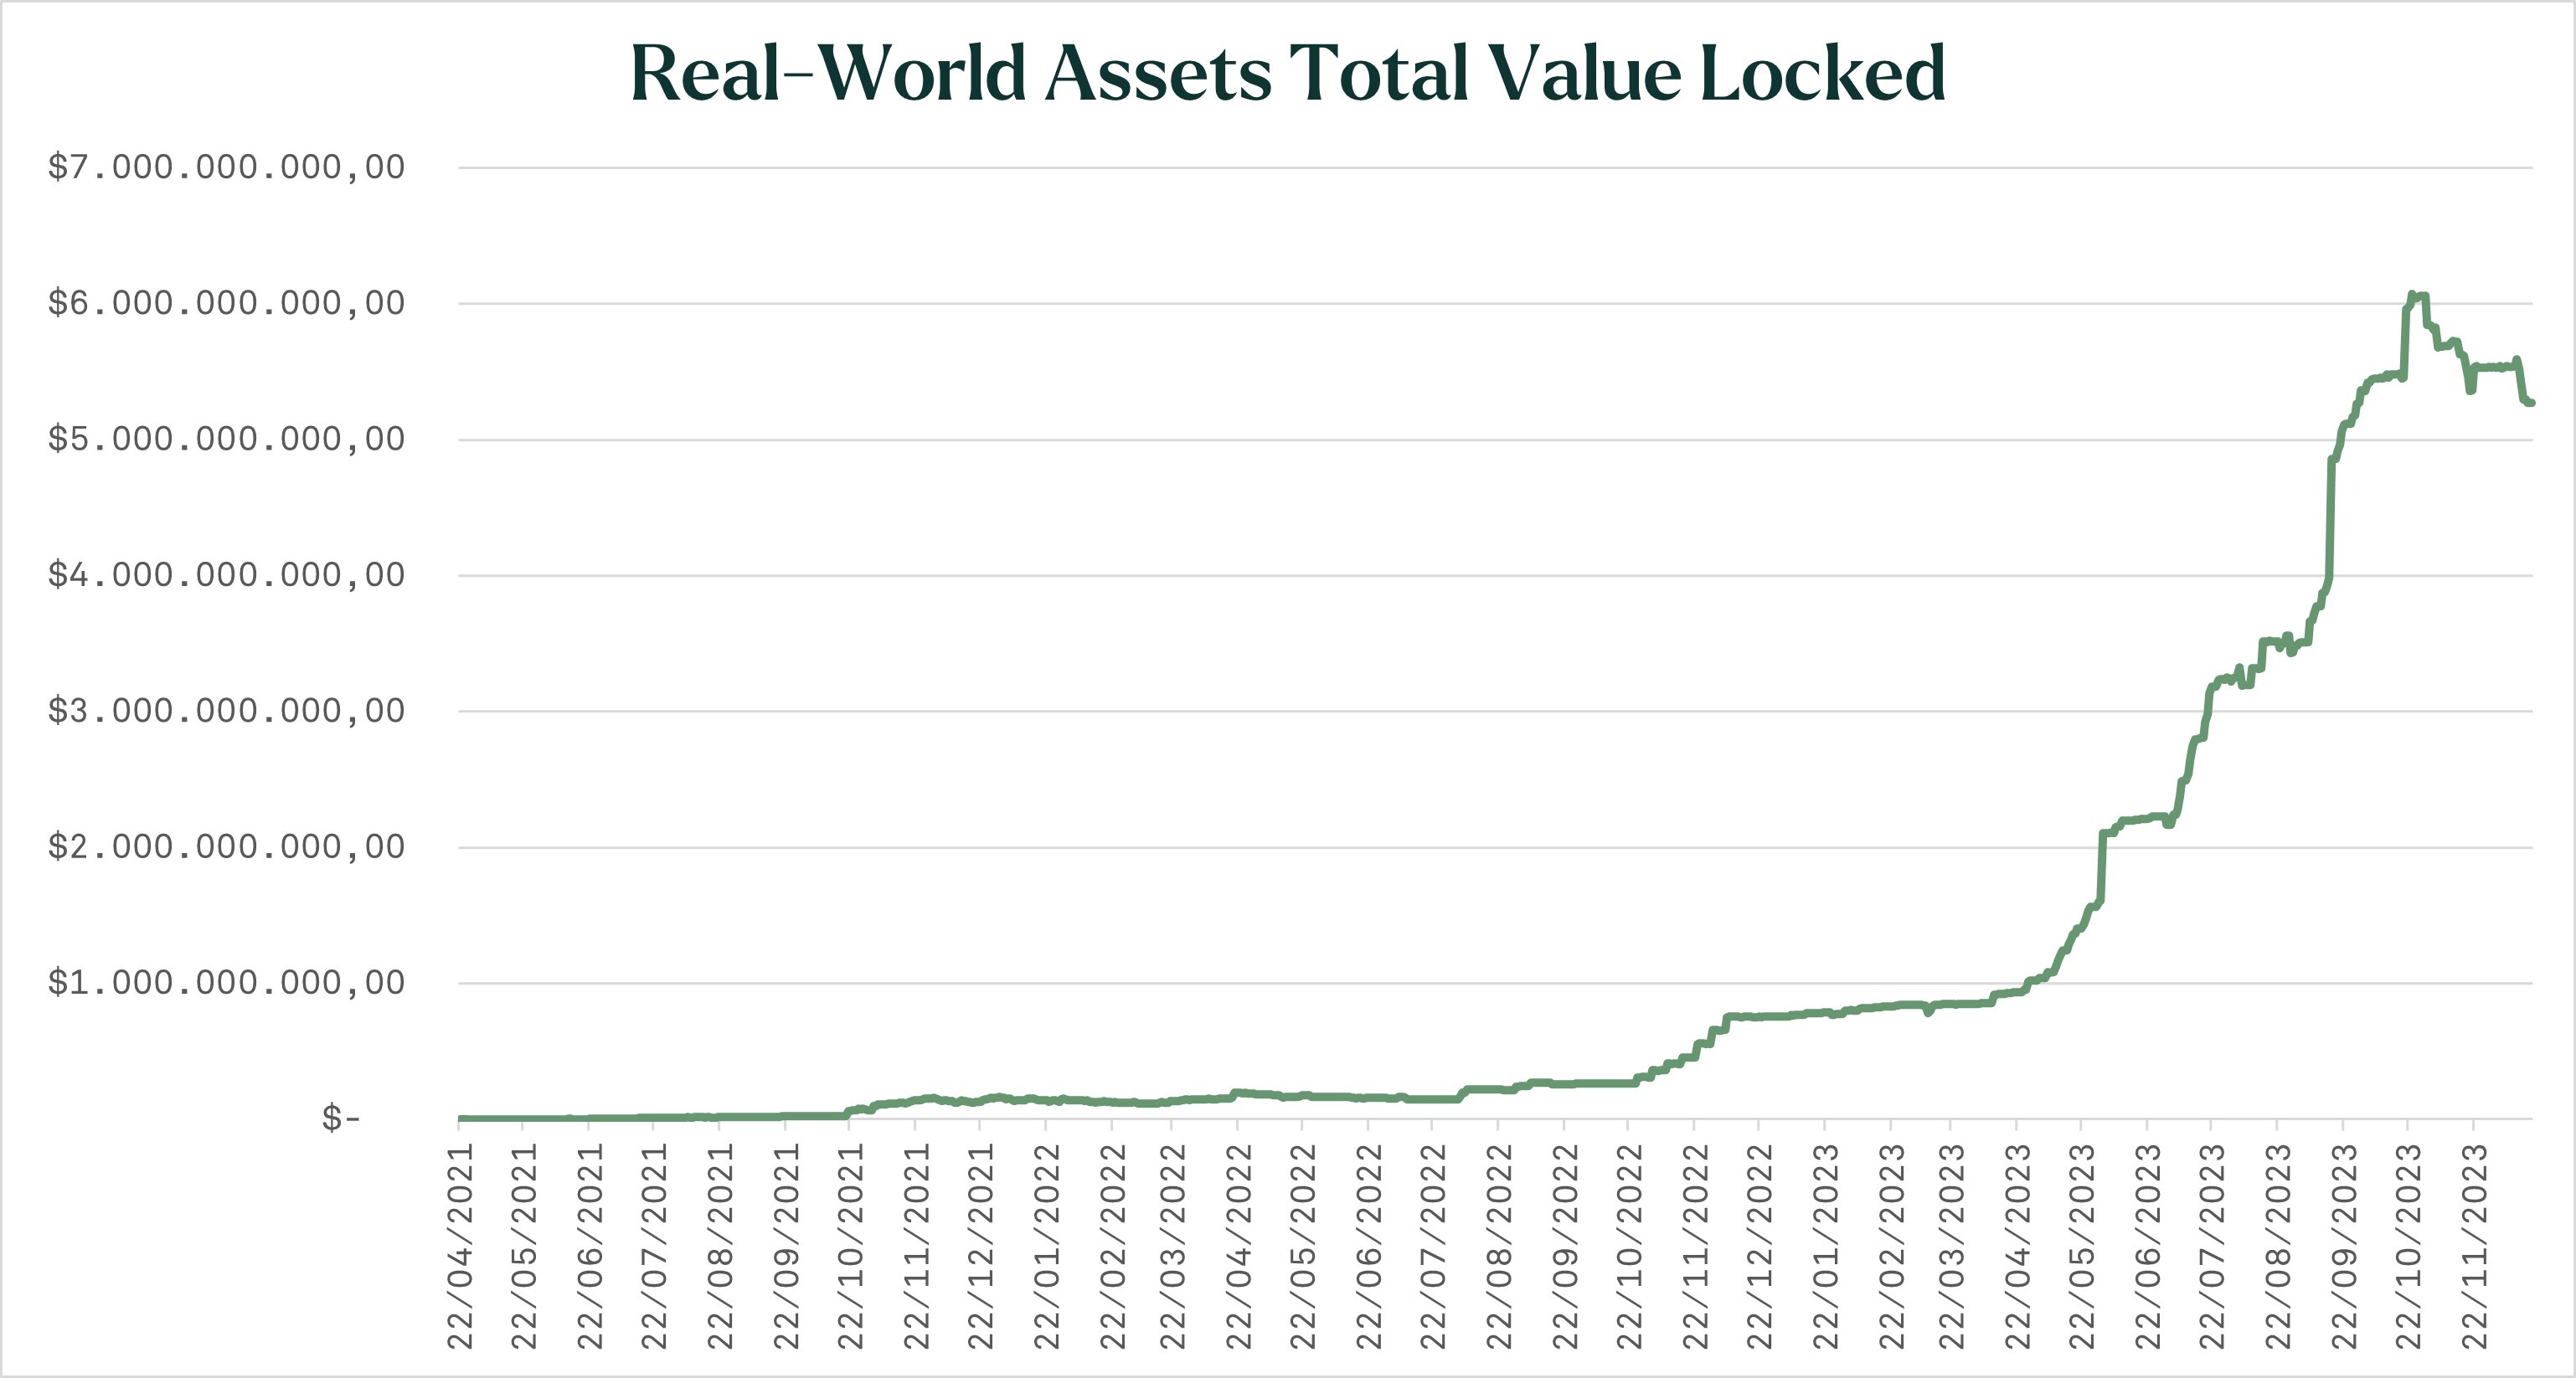 Real-world assets total value locked